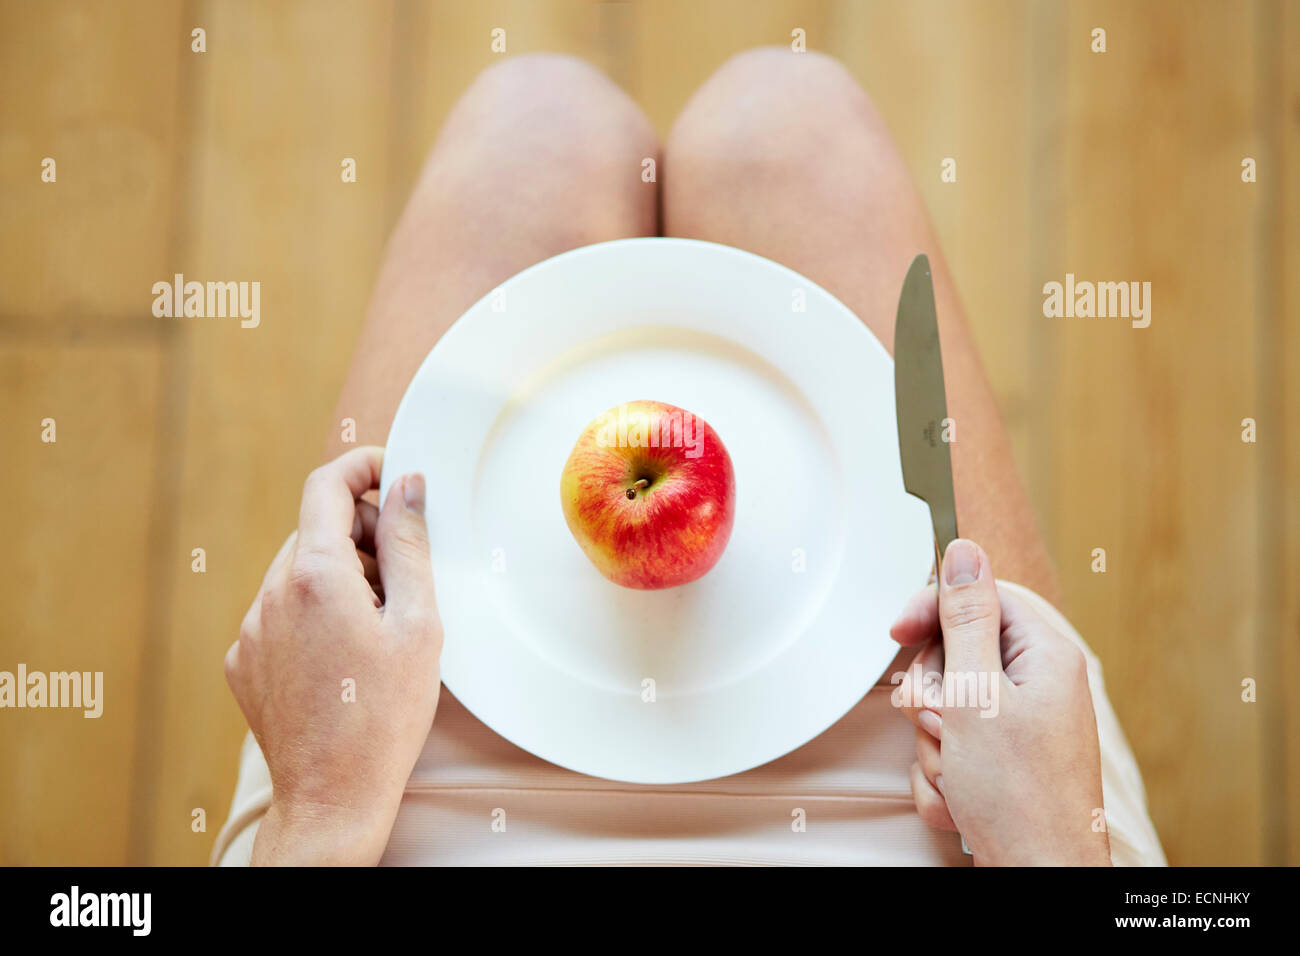 Apple on a plate ready Stock Photo